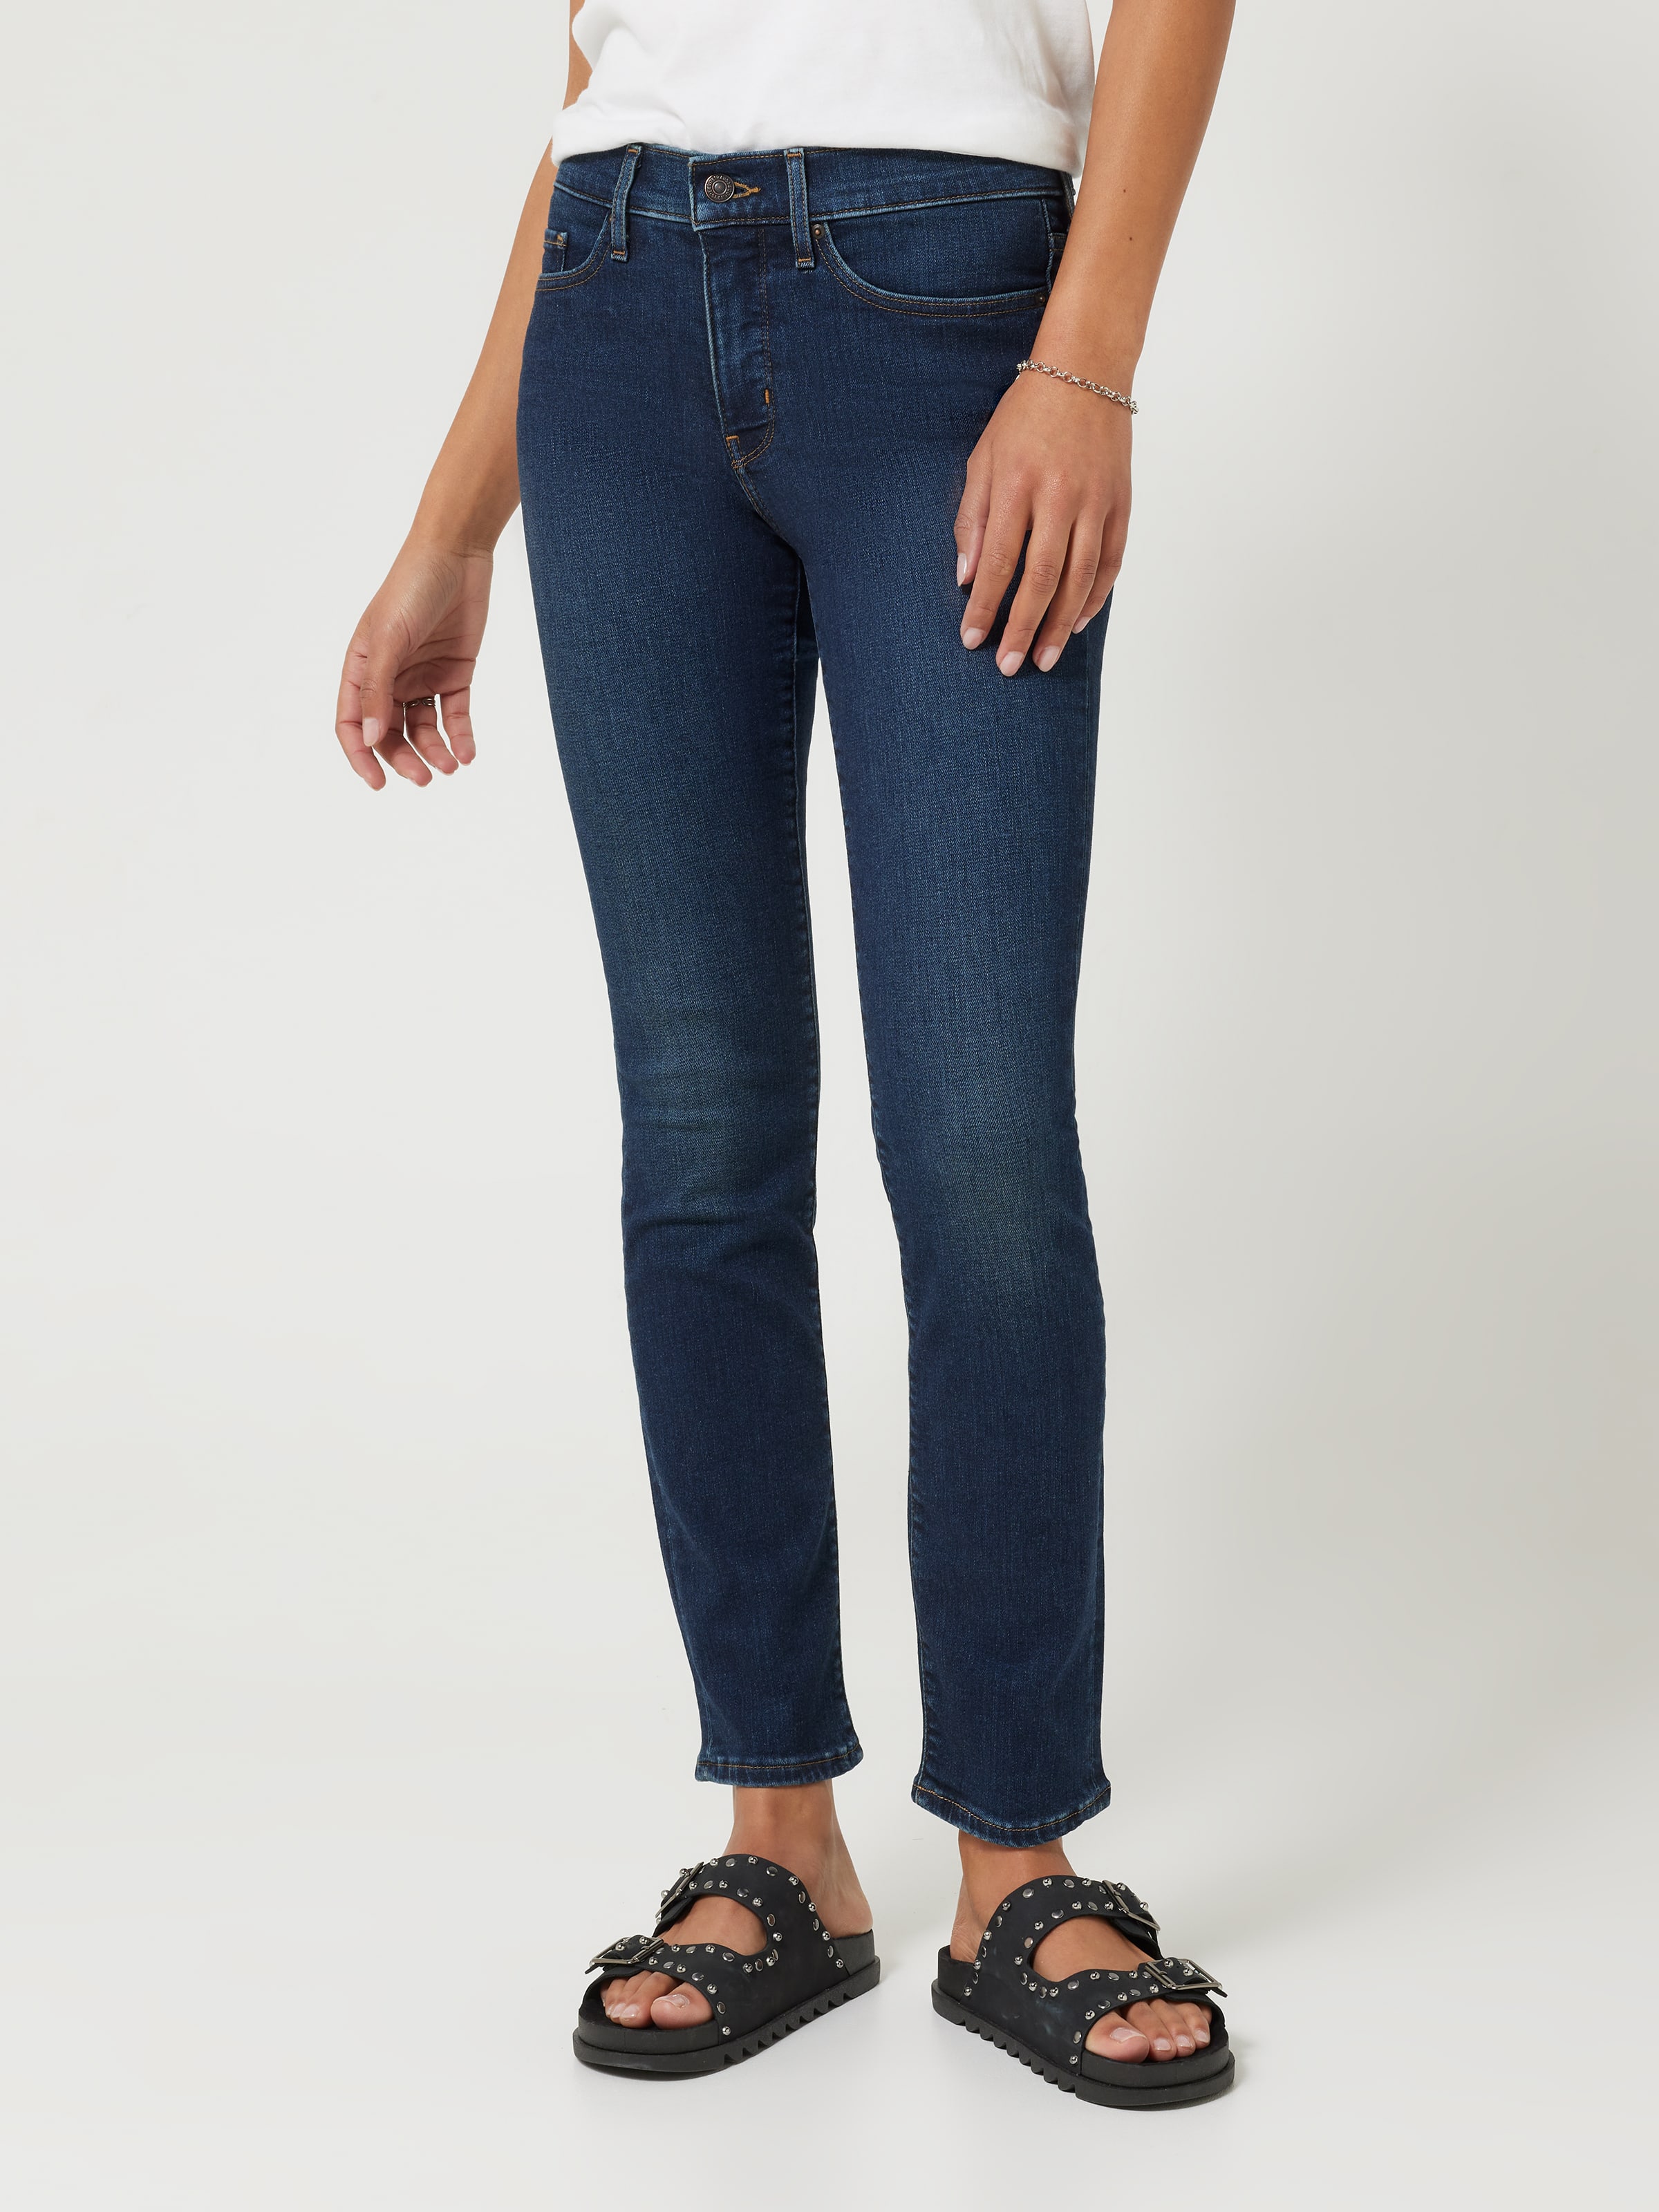 312 Shaping Slim Jean In Blue Swell - Just Jeans Online